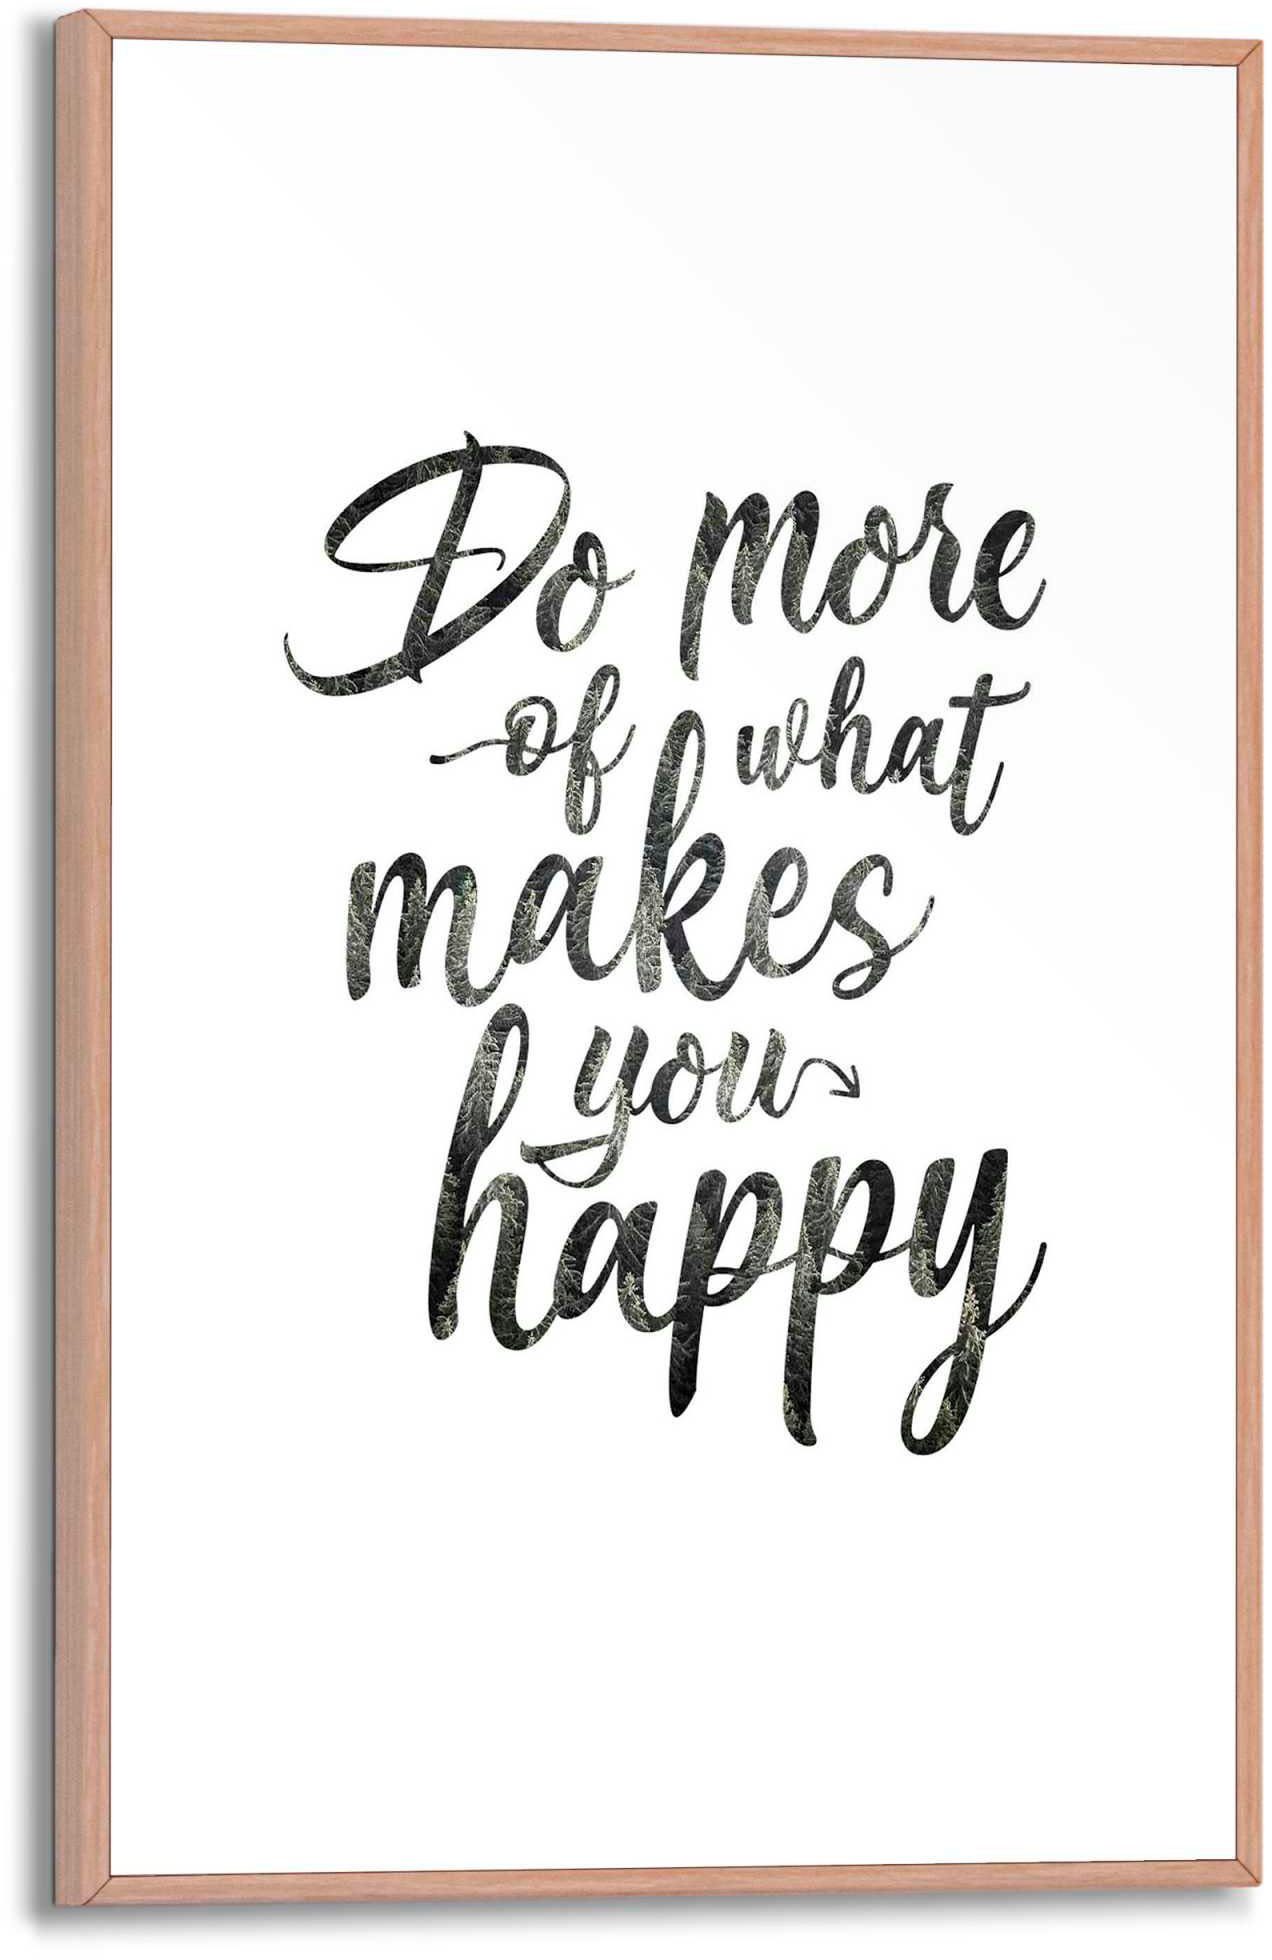 Reinders! Poster Do more of makes you happy what